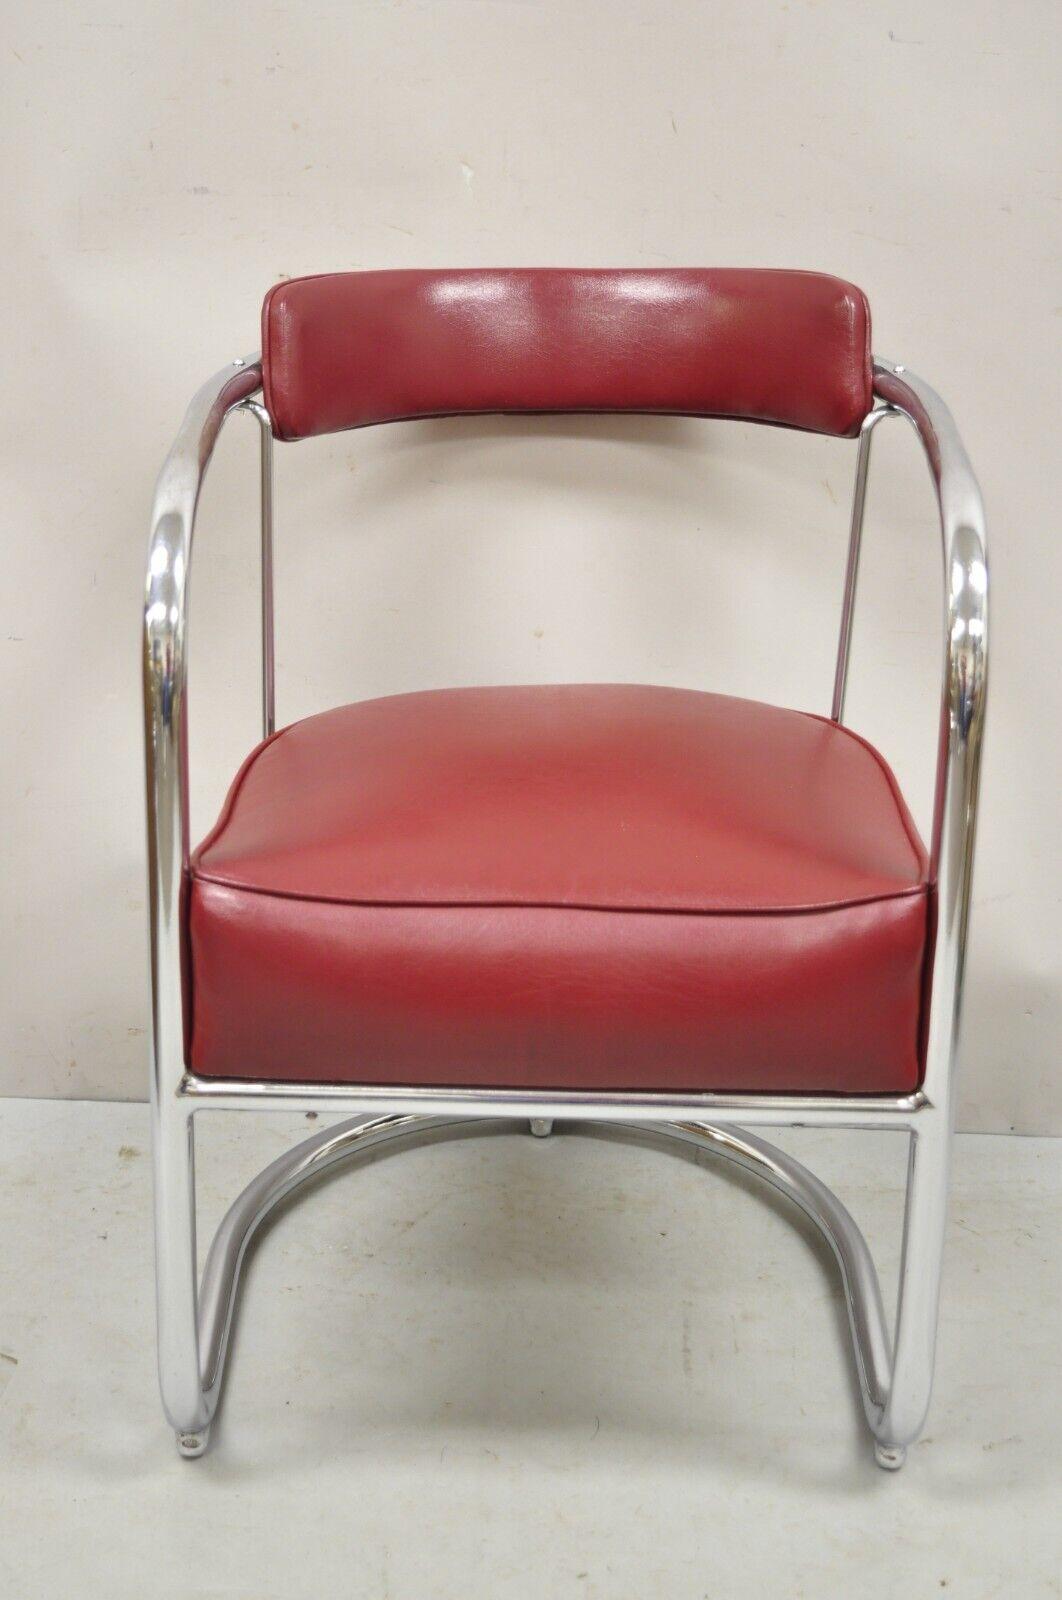 Lloyd Kem Weber Tubular chrome steel red vinyl cantilever arm chair. Item features red vinyl upholstery, tubular chrome metal frame, very nice vintage item, quality American craftsmanship, great style and form, attributed to Kem Weber for Lloyd.